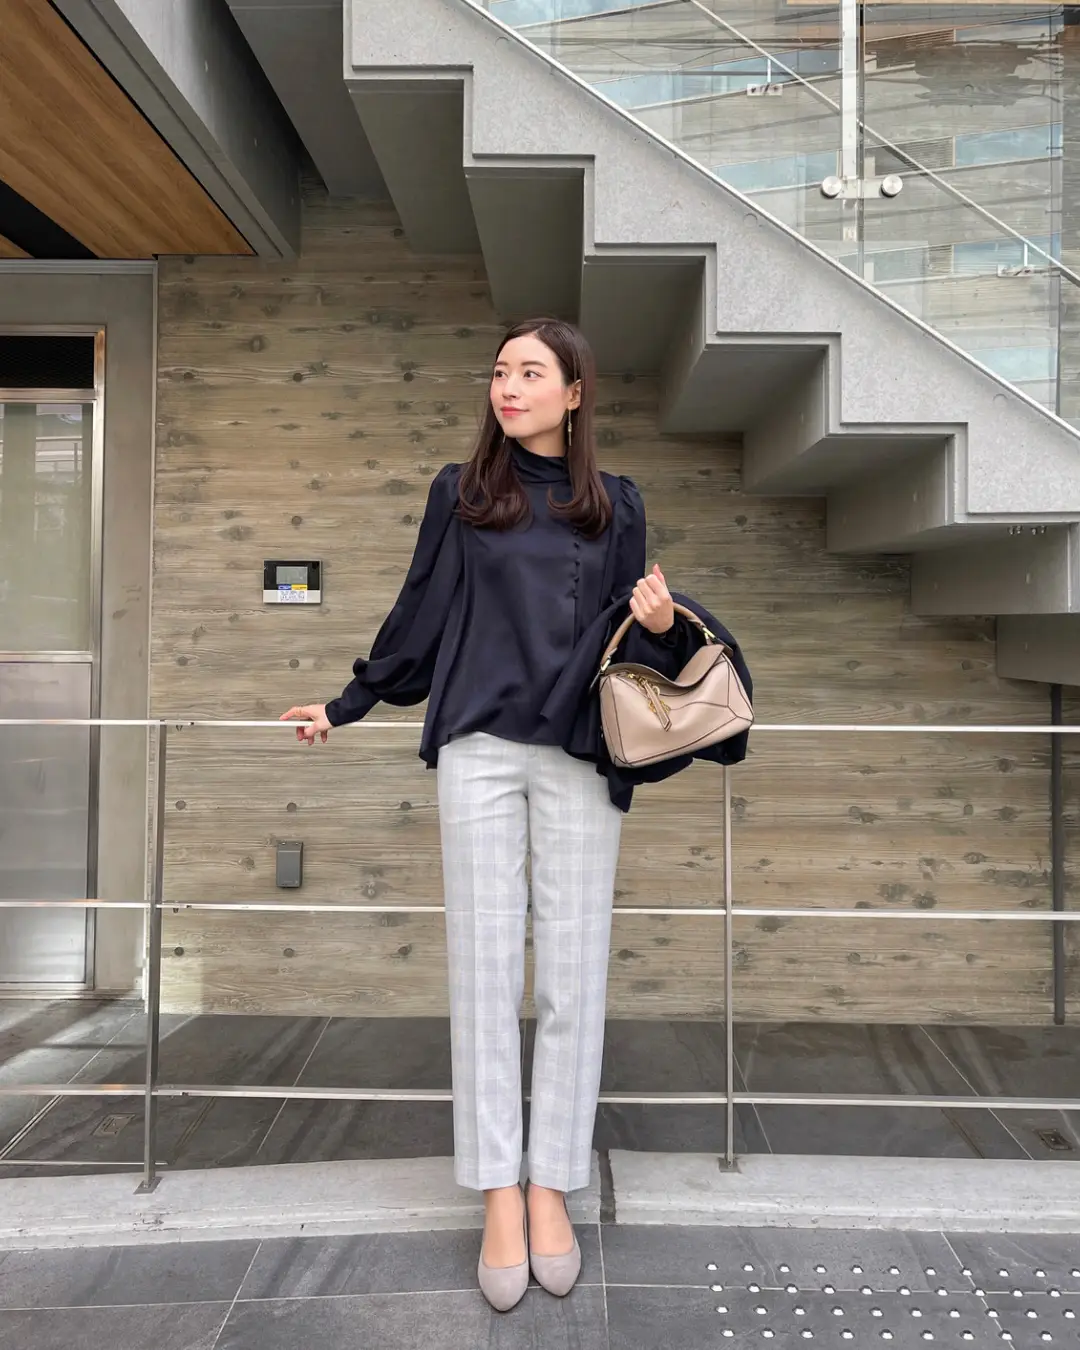 OFFICIAJI 🕊 UNIQLO, GU PANTS | Gallery posted by 𝐓𝐚𝐤𝐚𝐤𝐨